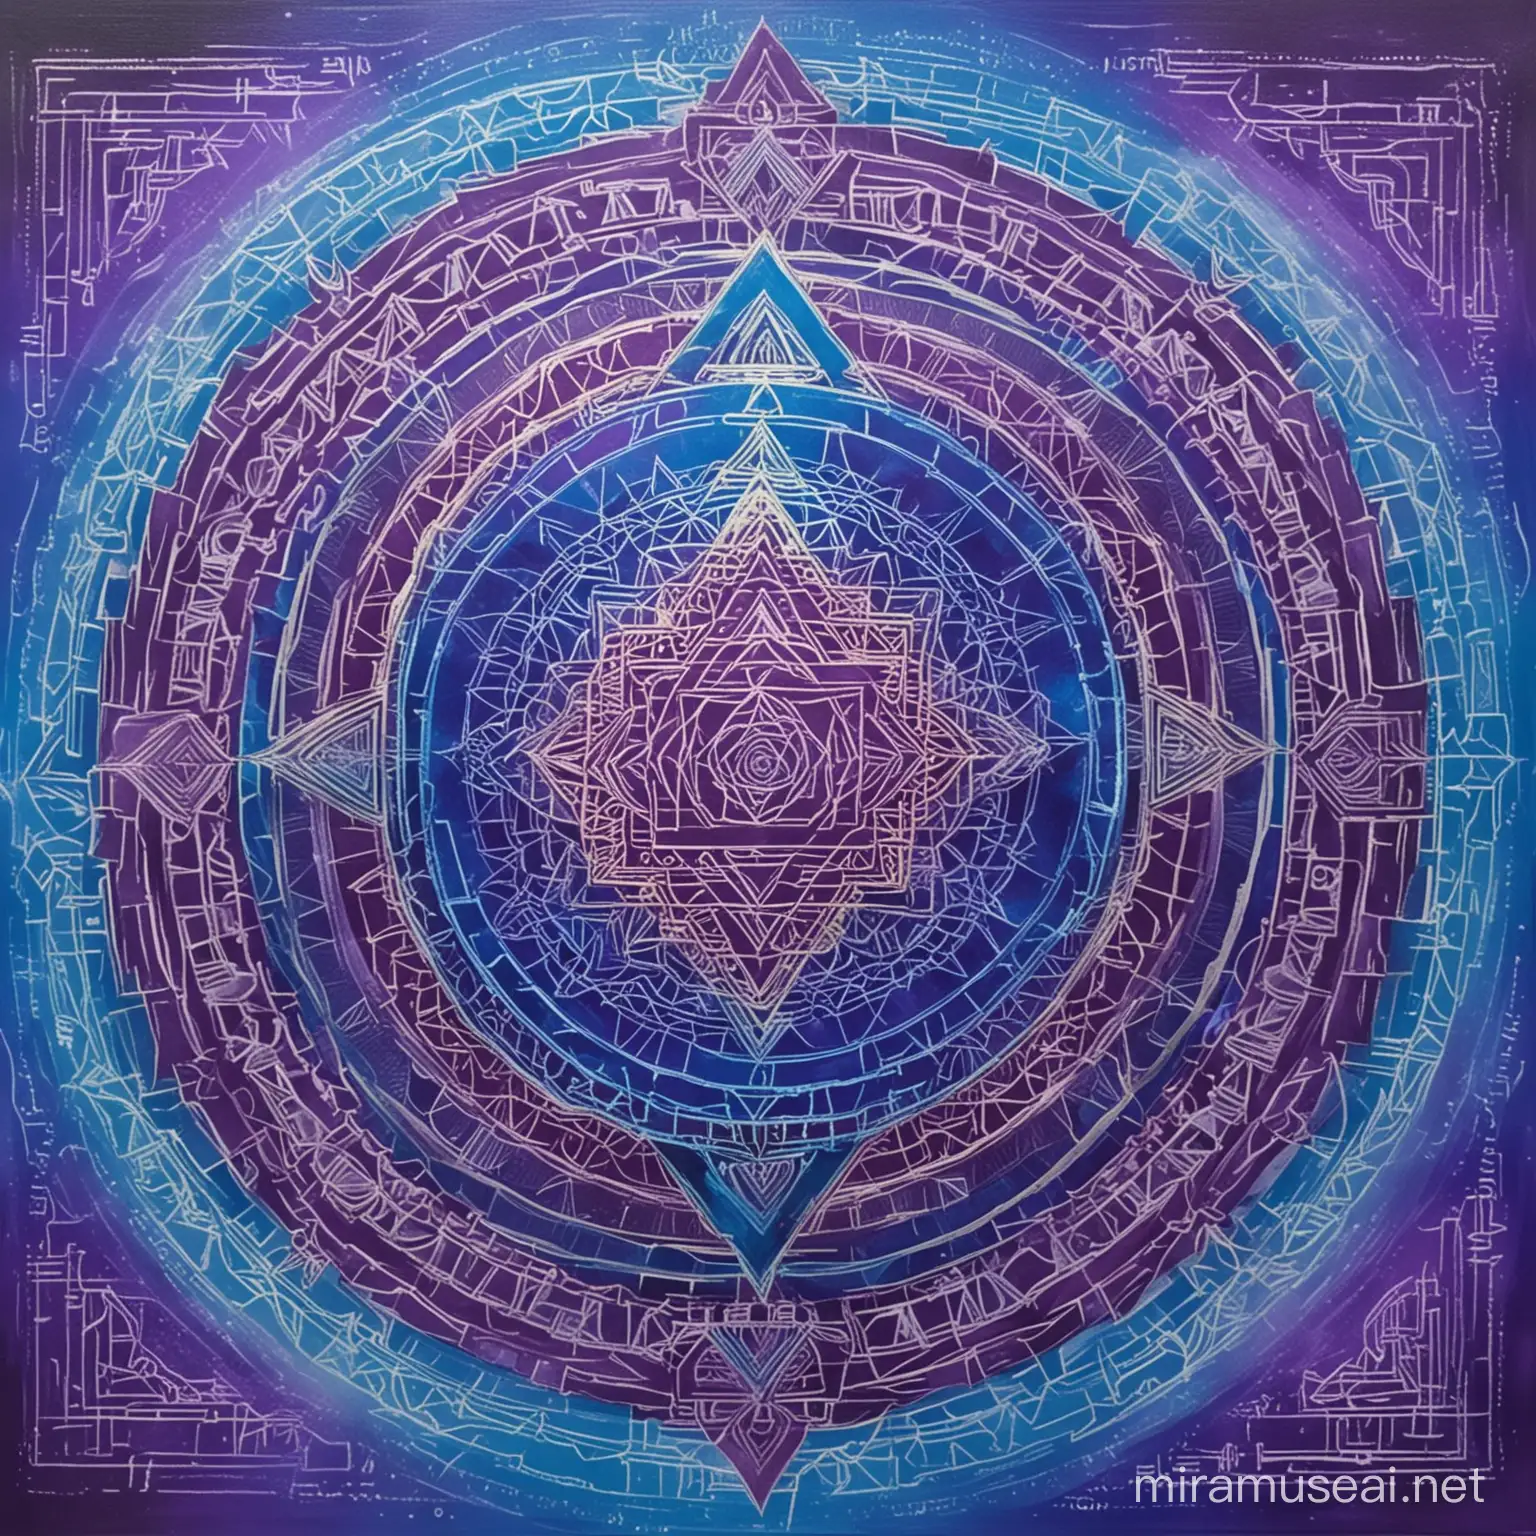 create an artwork that encompasses the notion of someone being connected to something greater than themselves. make it otherworldy and divine. please theme the colours vibrant electric blue and purple. feature a sri yantra somewhere in the piece and imply a connection to something greater than ourselves